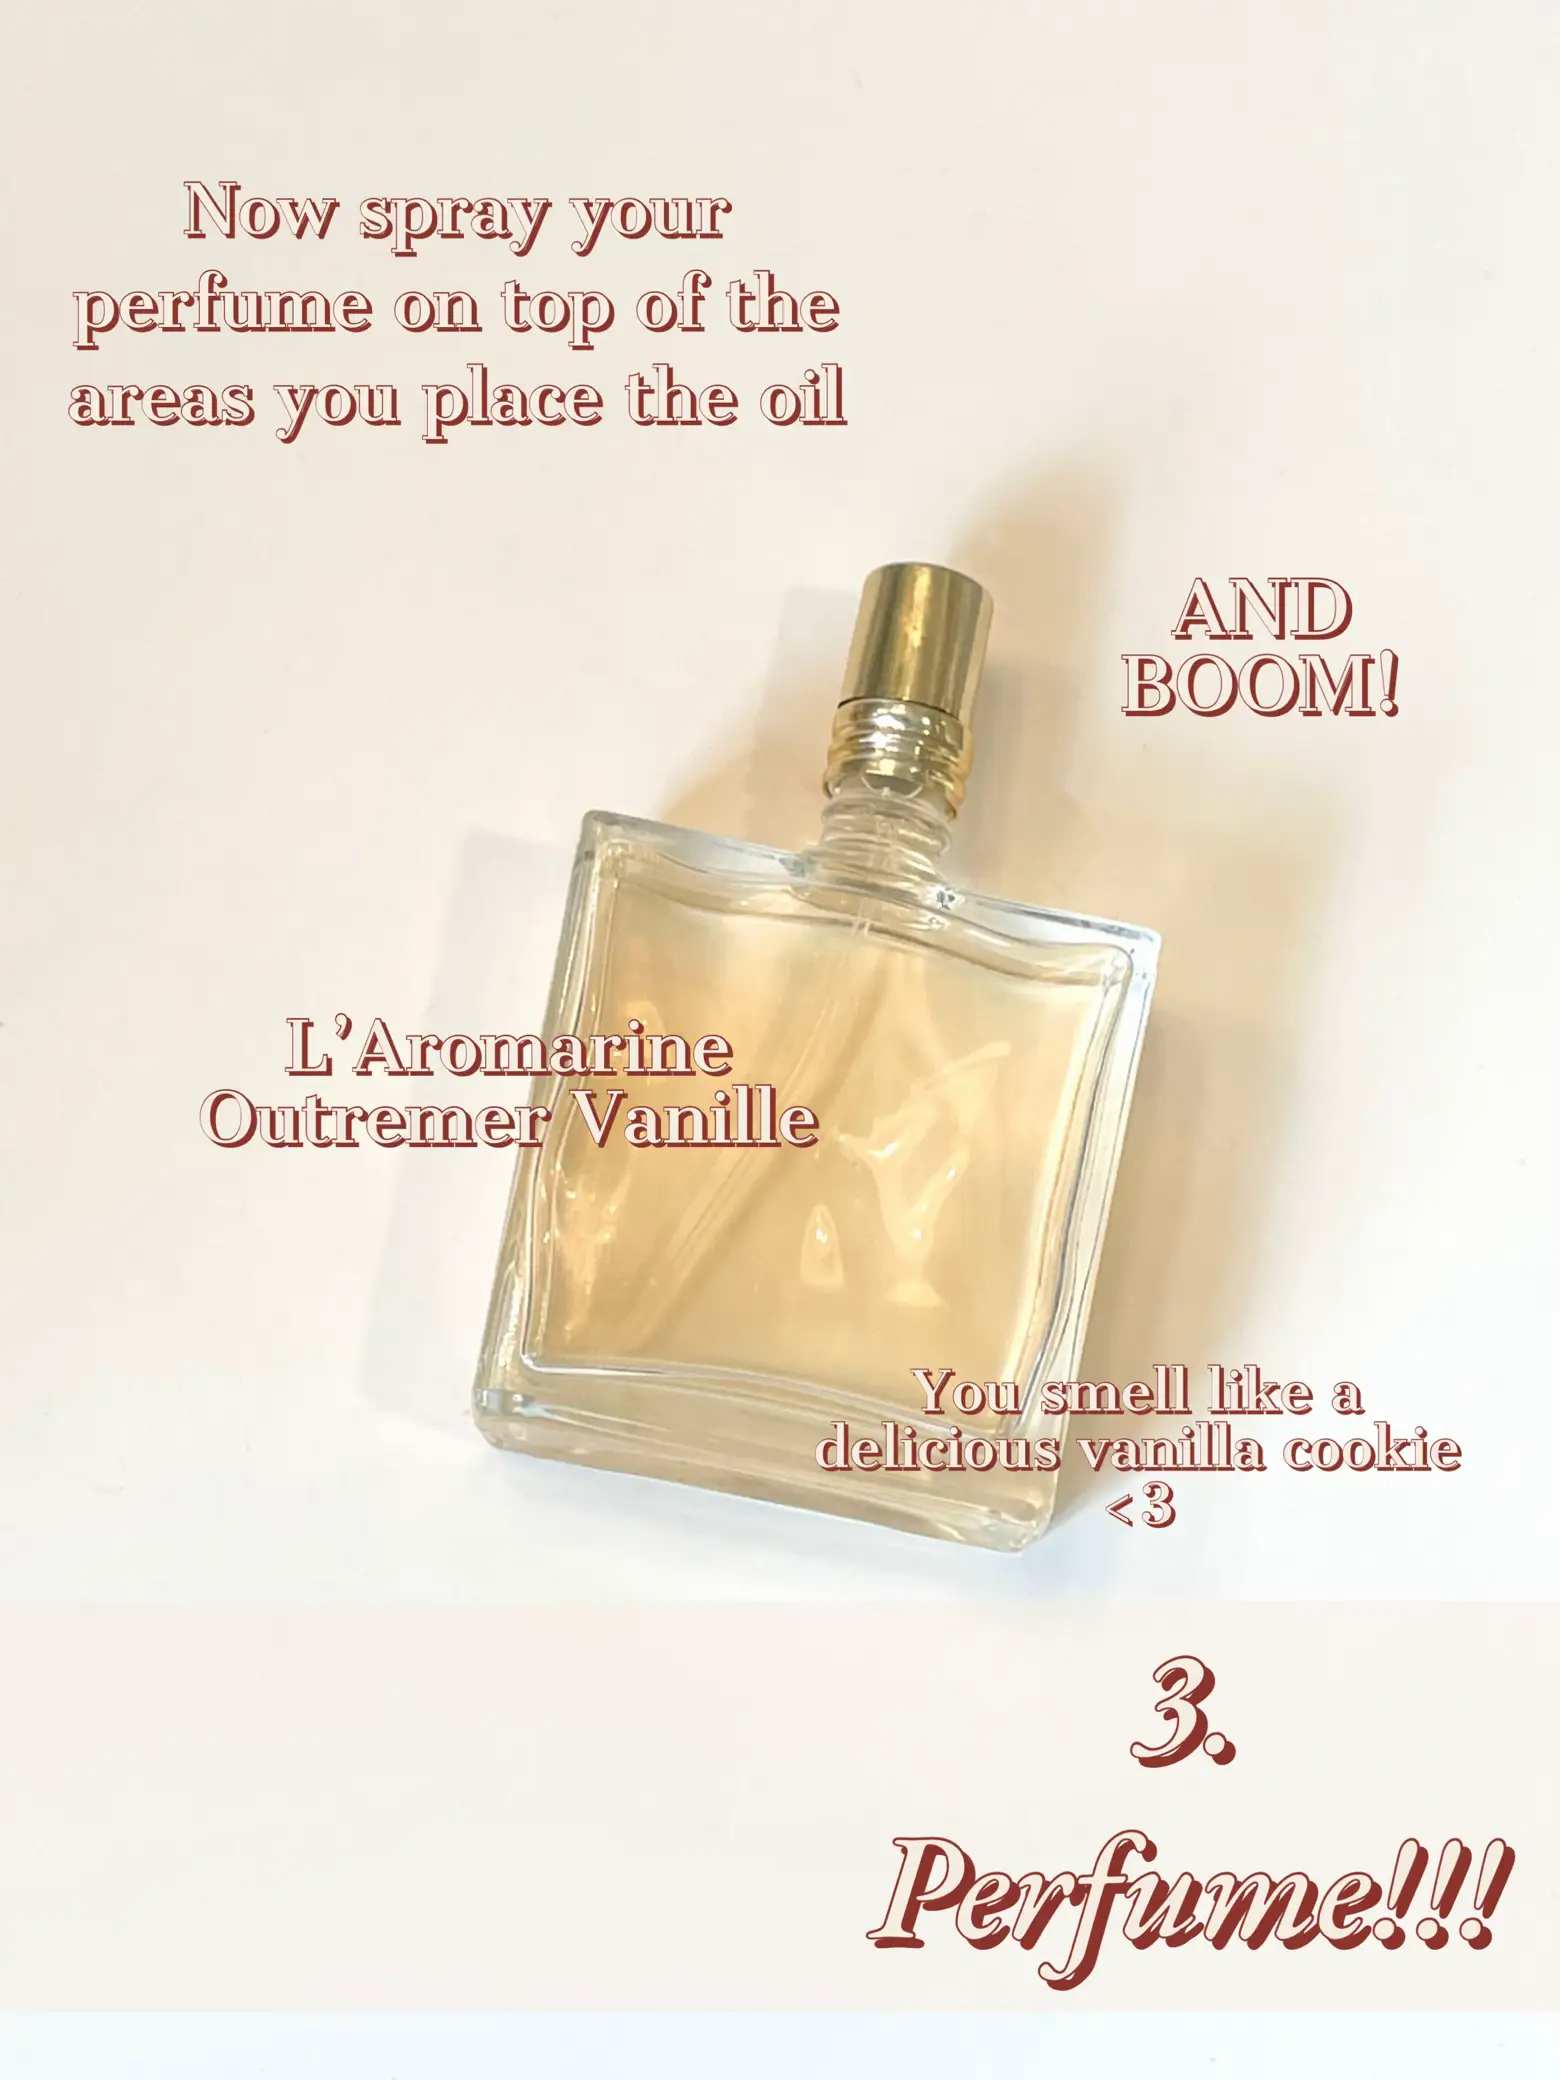 How to properly apply perfume Body Oil to last all day 🧴🫧✨ ♡ ♡ ♡ ♡ ♡, Perfume Oil